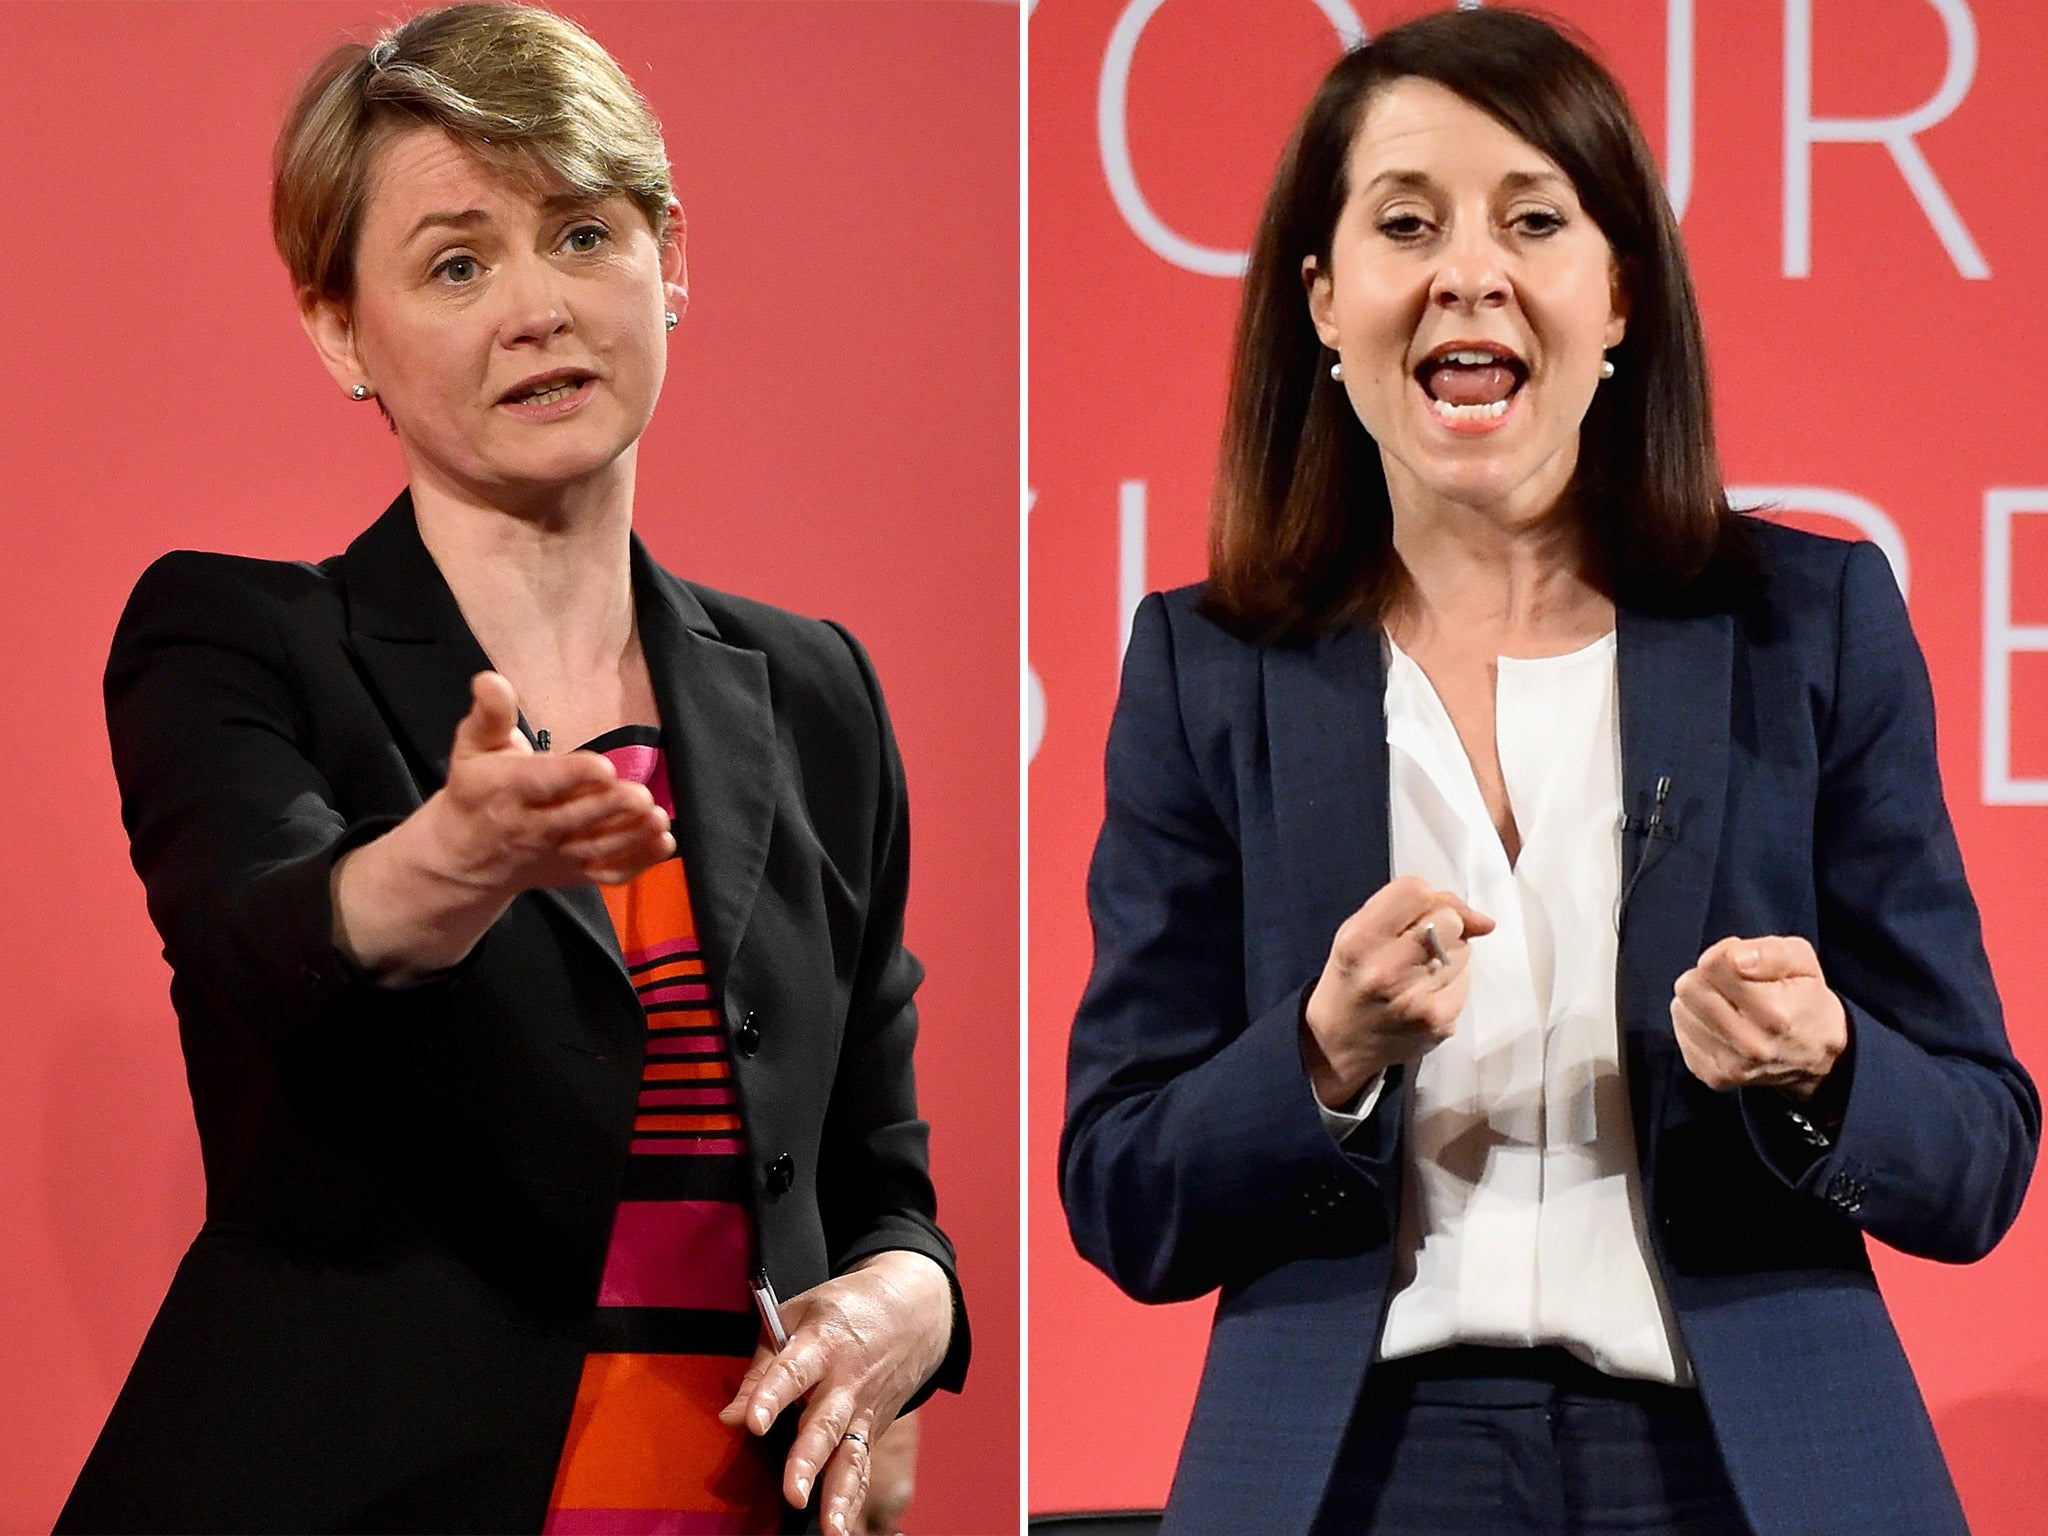 Centrist candidate Yvette Cooper and Blairite standard-bearer Liz Kendall, the two female candidates in the race to replace Ed Miliband